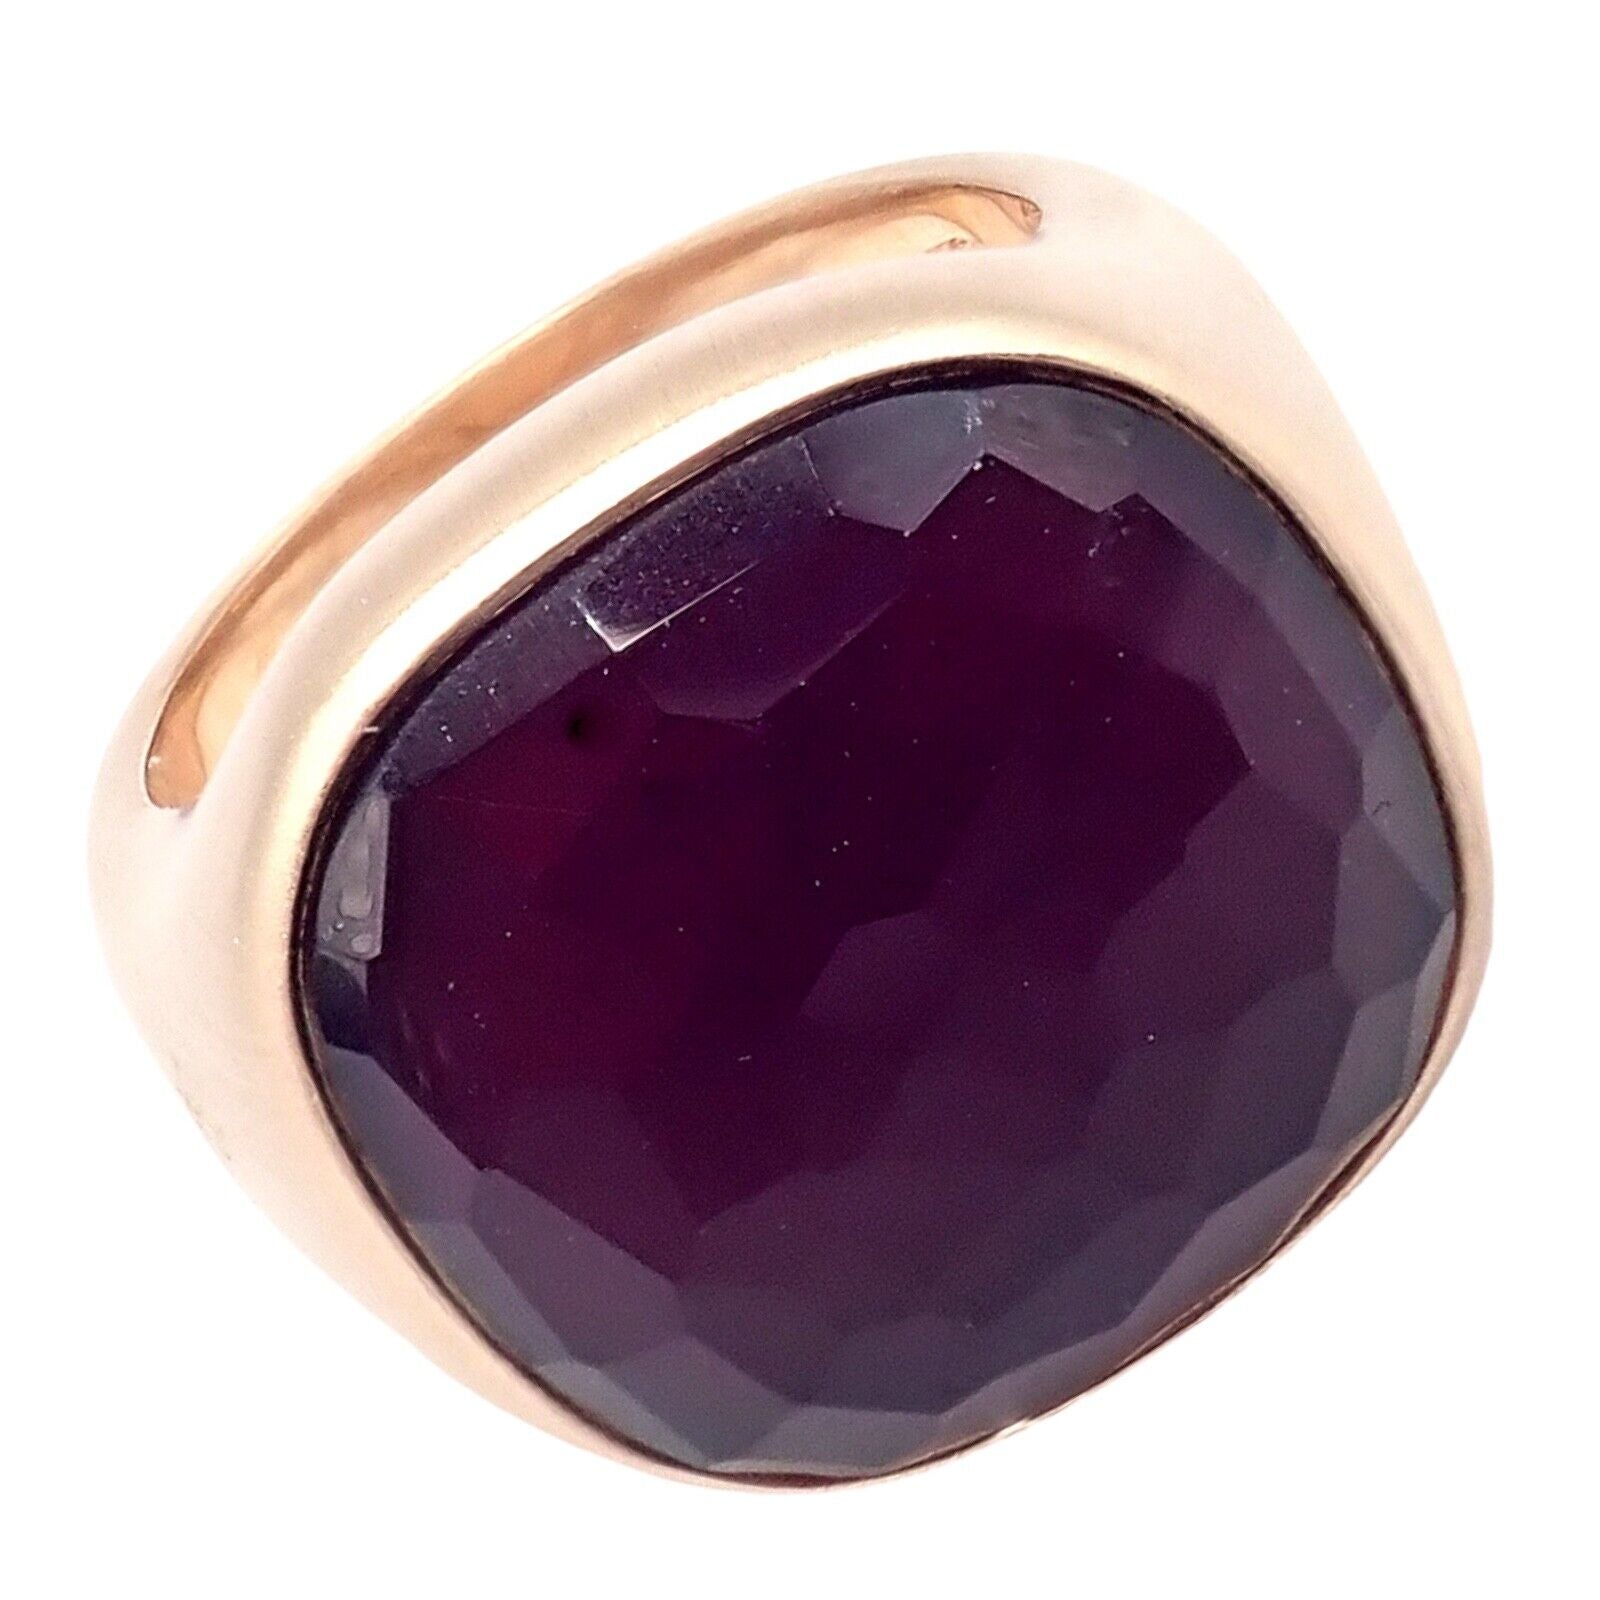 Authentic! Pomellato 18k Rose Gold Large Faceted Amethyst Victoria Ring sz 6.5 | Fortrove